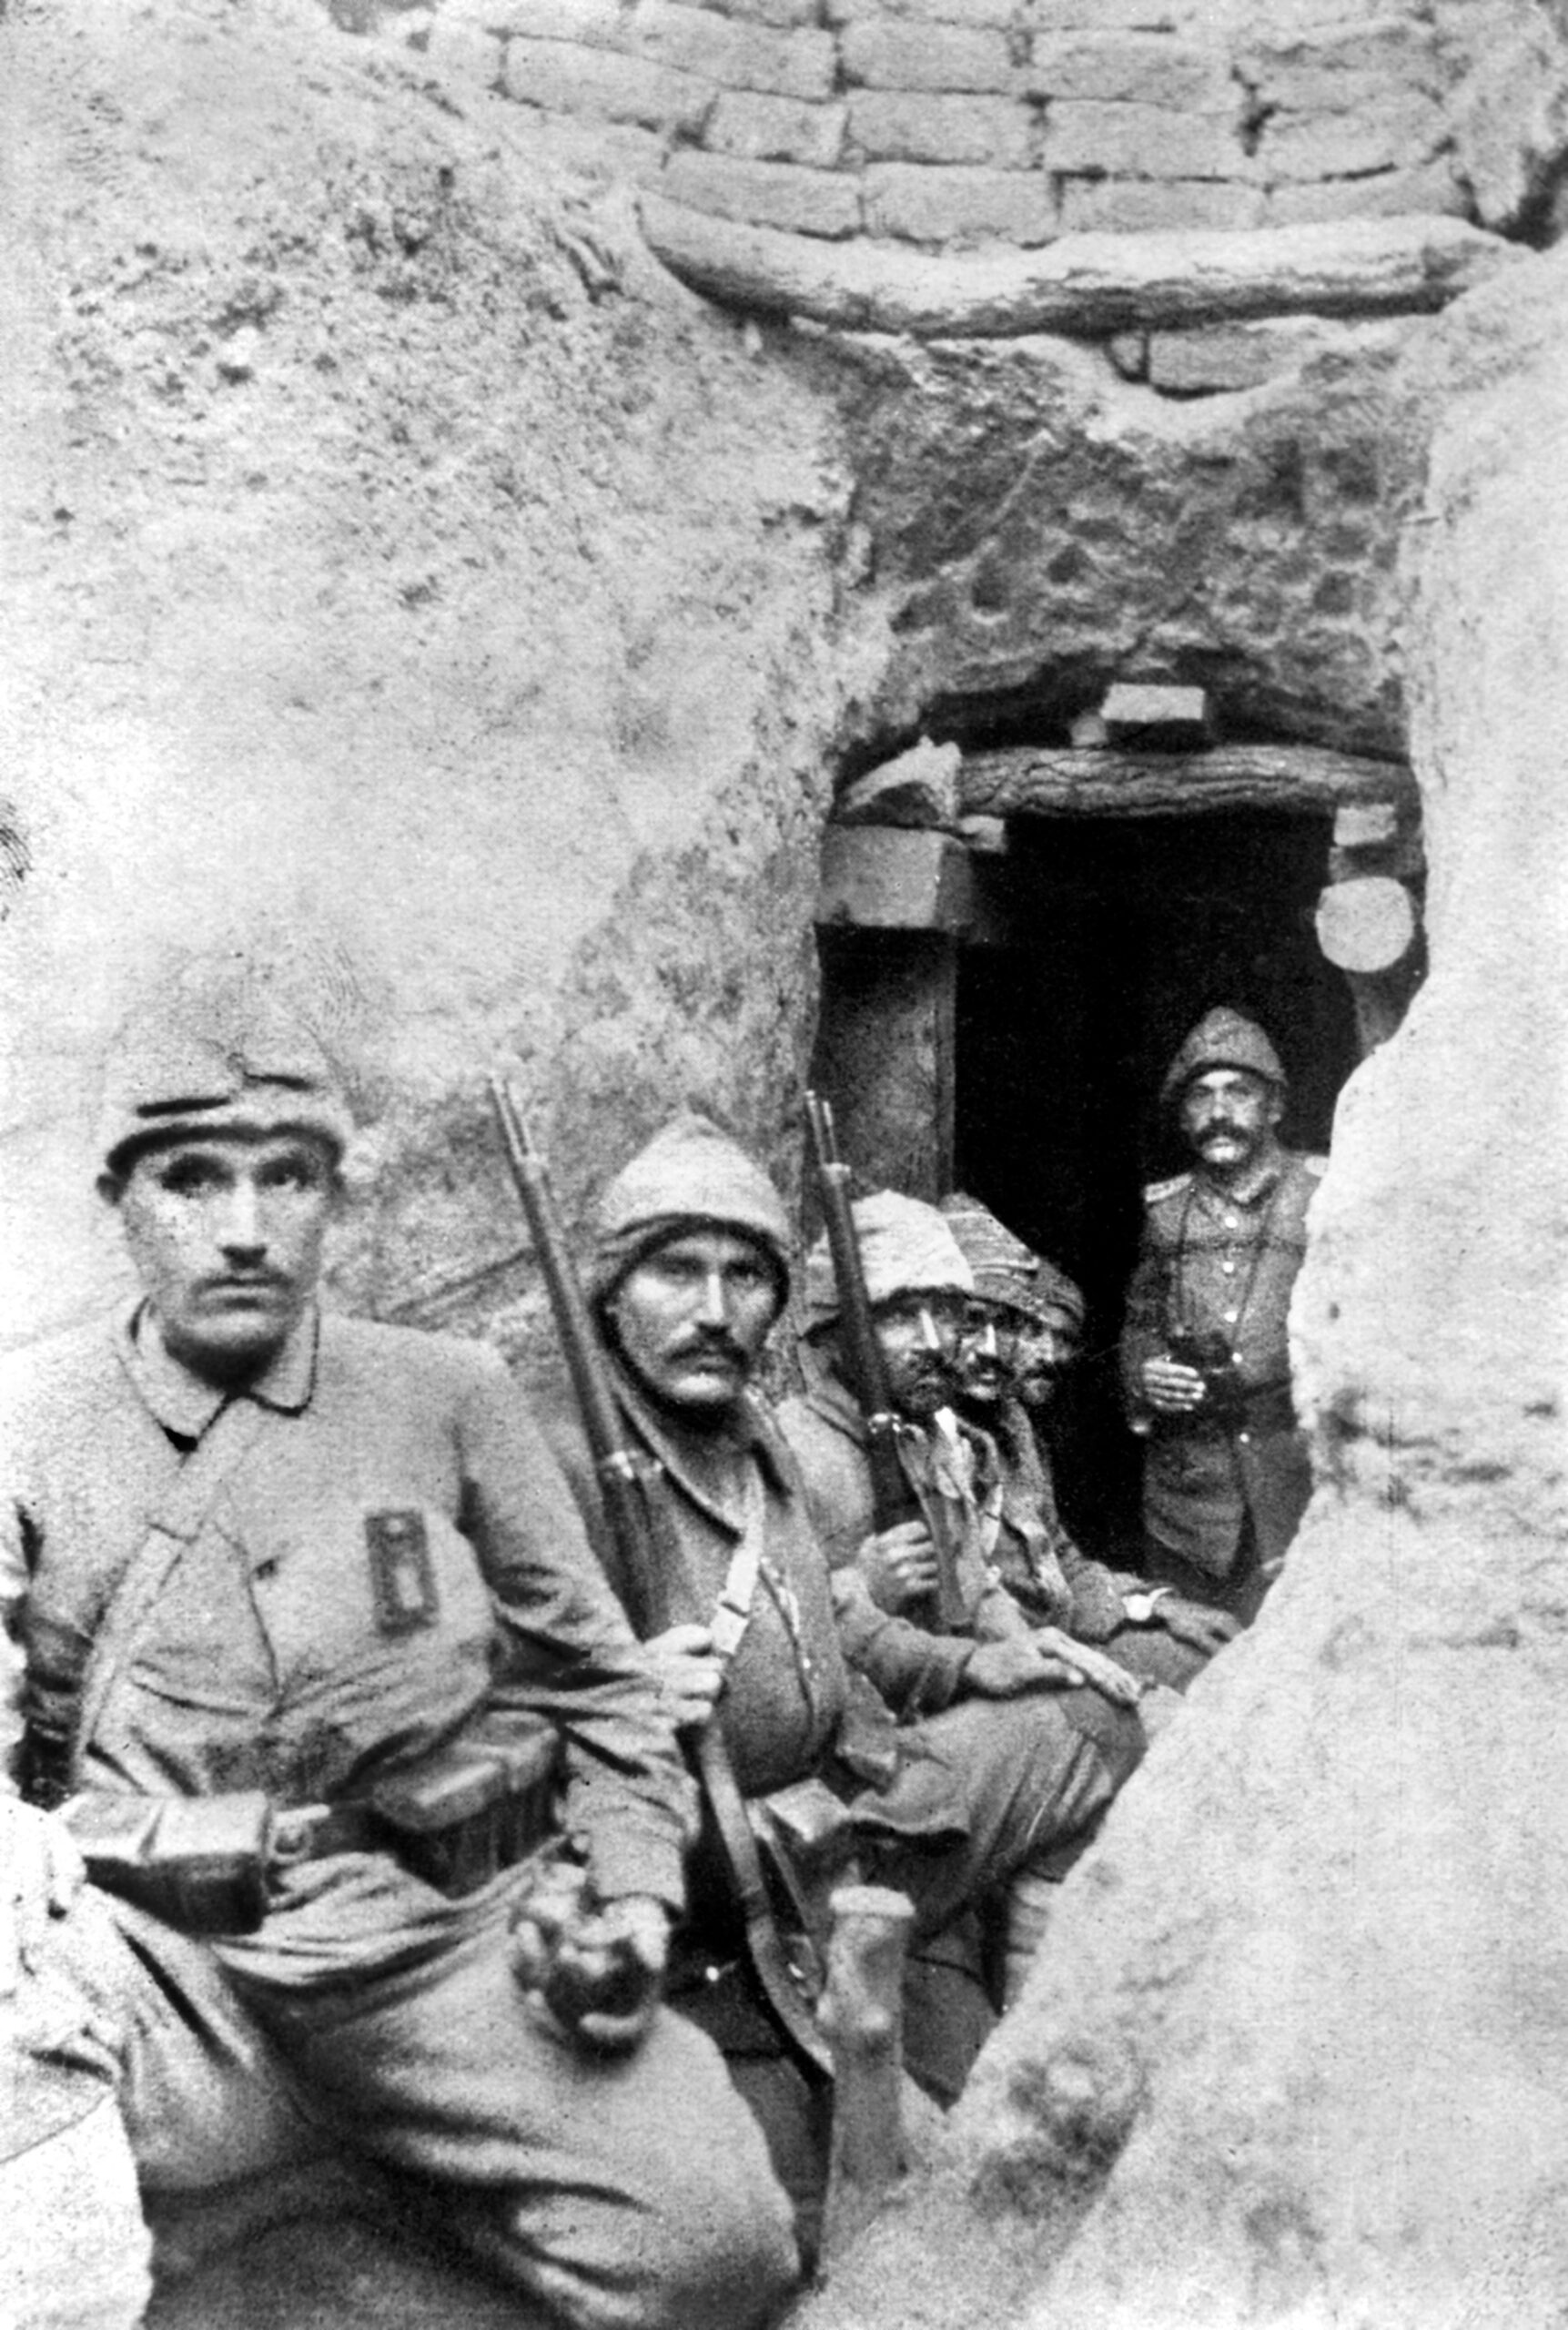 Turkish soldiers armed with German-made Mauser rifles are seated in a trench next to one of the thousands of dugouts on the peninsula used for protection against incoming artillery shells. Ottoman General Mustafa Kemal Pasha’s inspired leadership played a key role in the Ottoman victory.